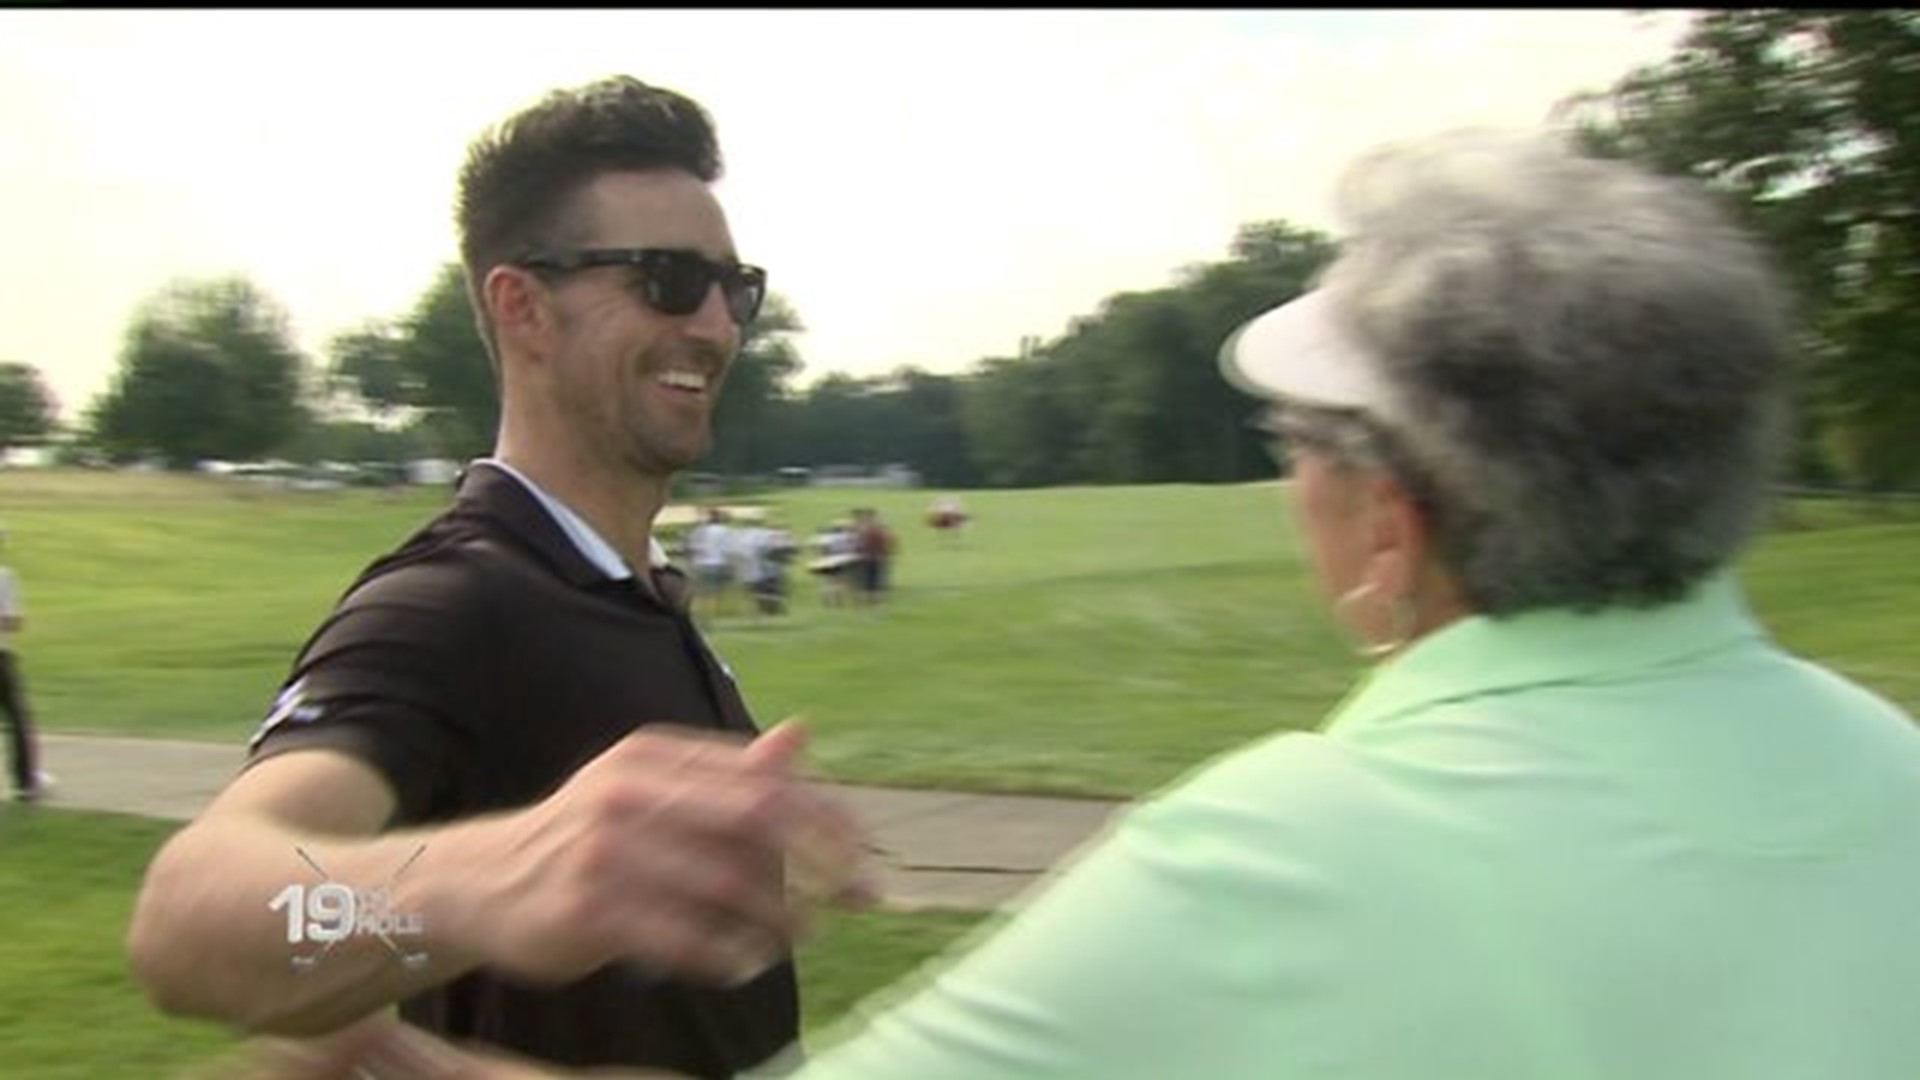 Country star Jake Owen makes fans day at JDC Pro-Am